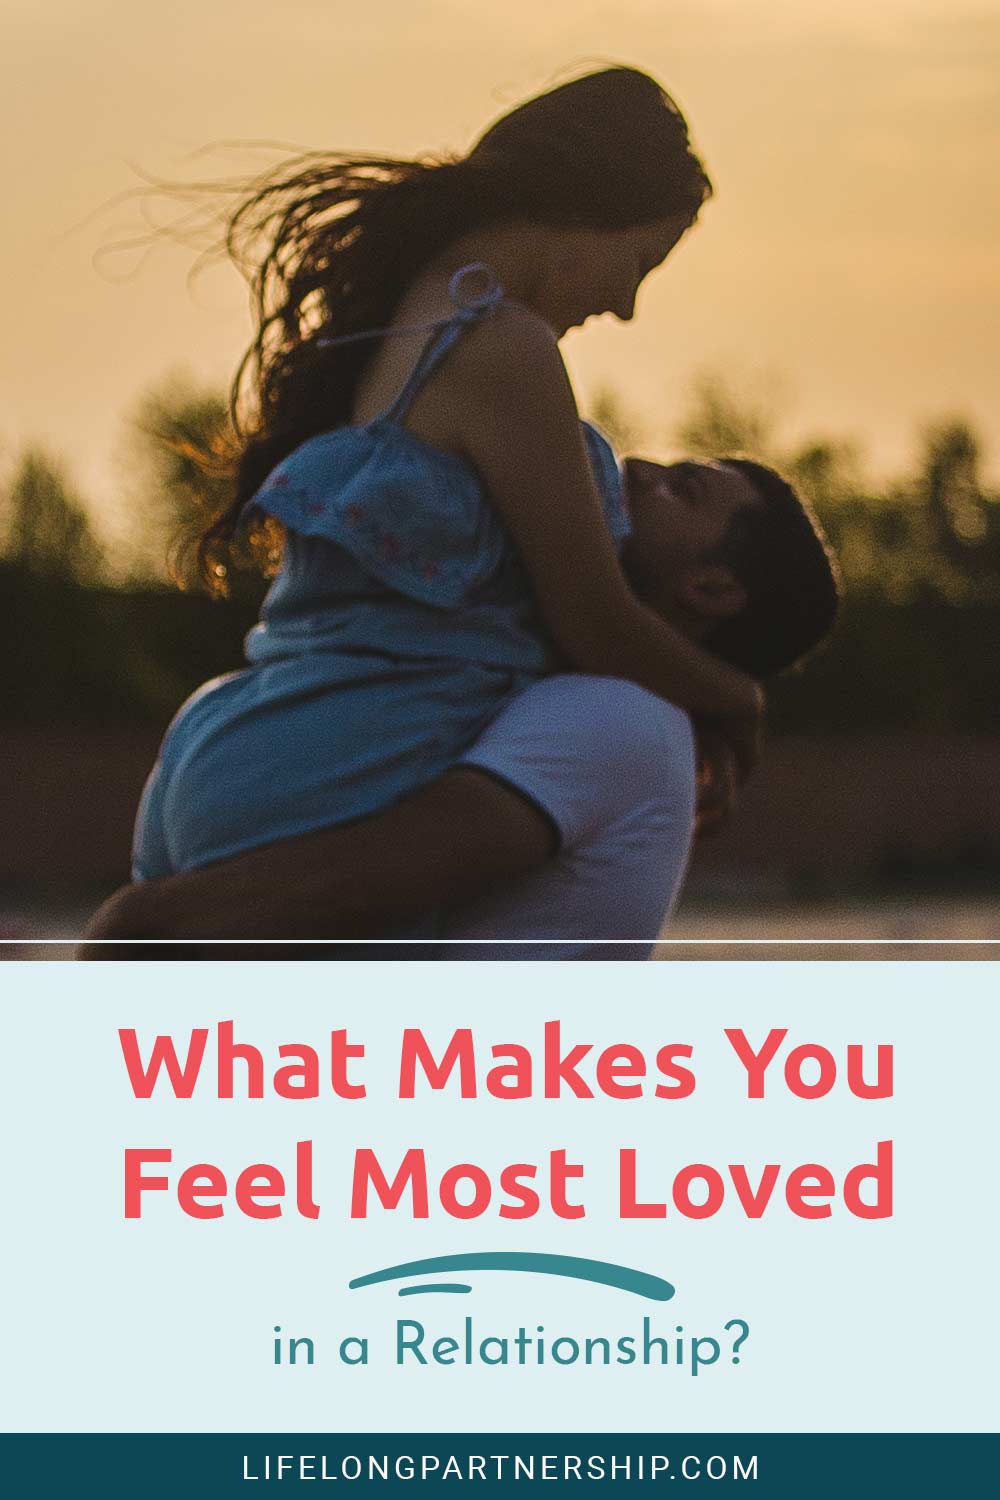 What Makes You Feel Most Loved in a Relationship?